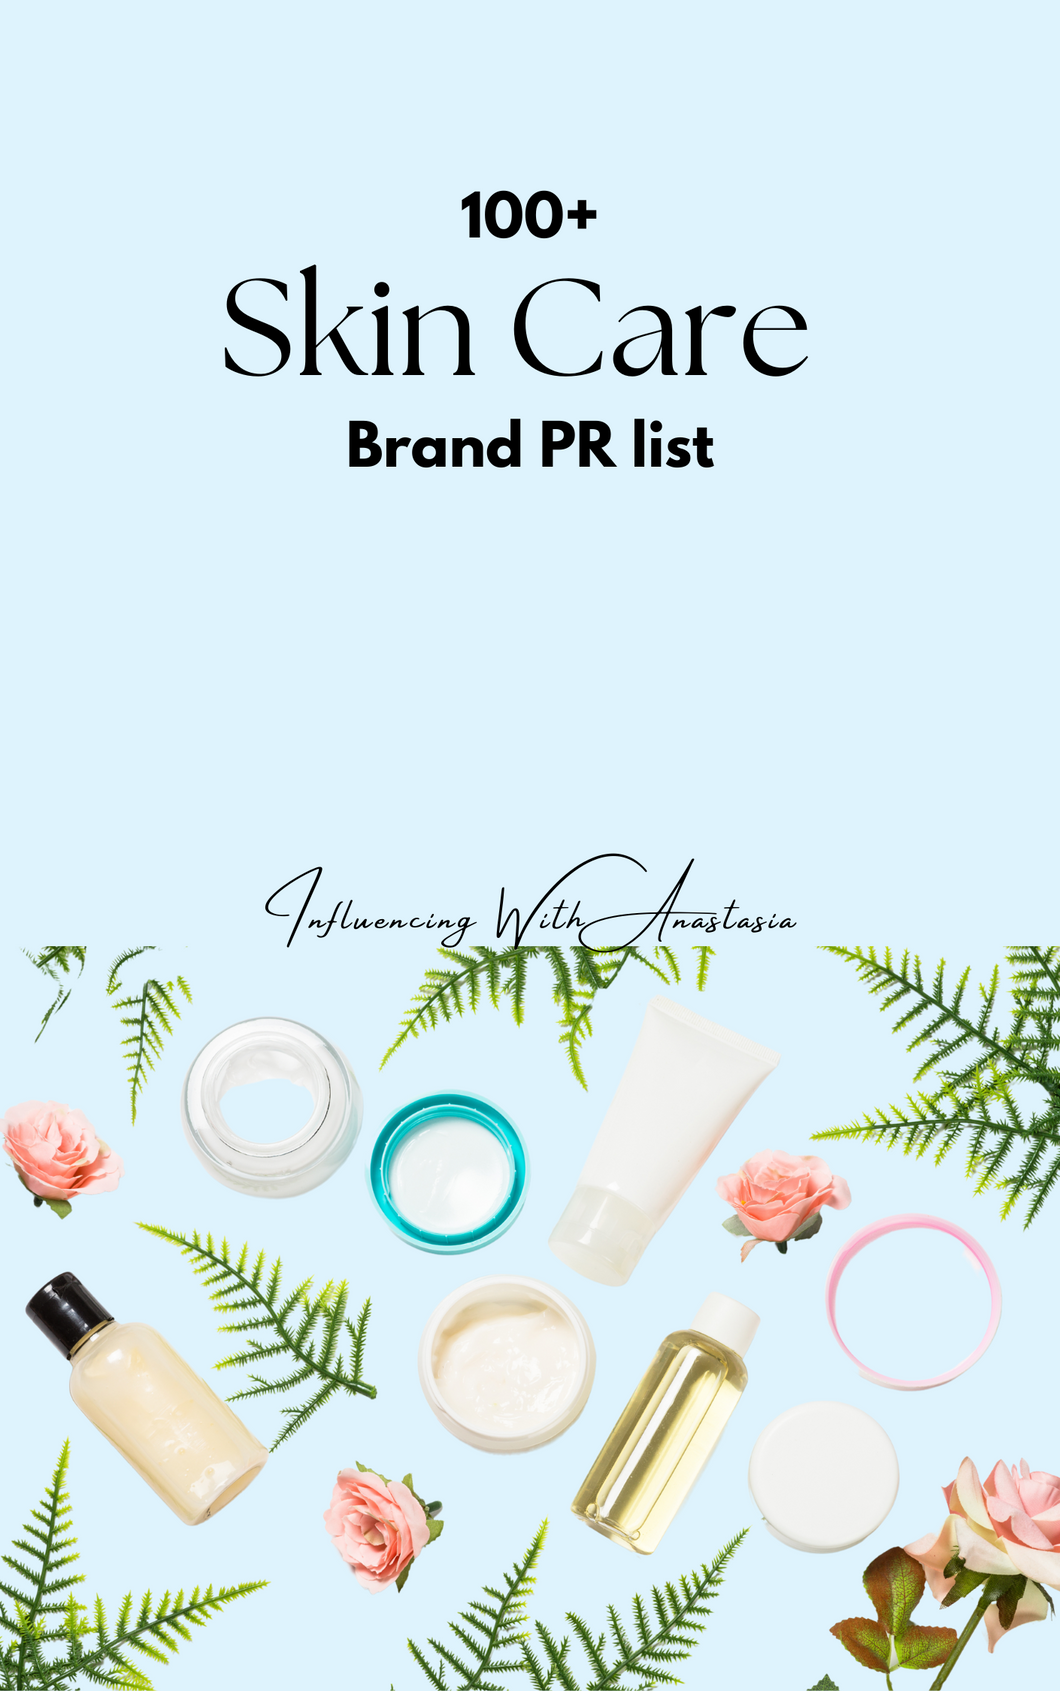 100+ SKIN CARE Brand Email List